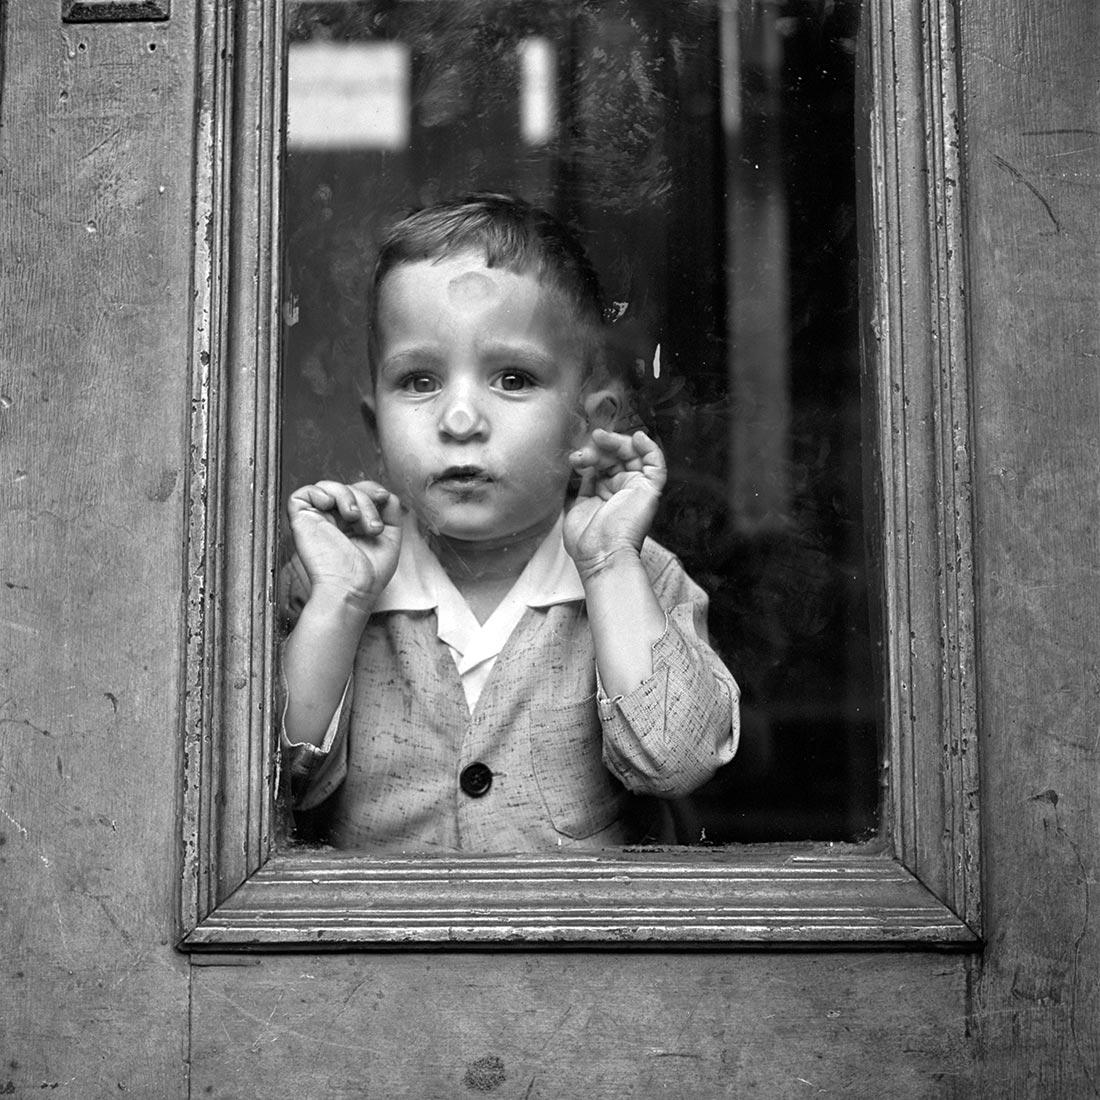 8 Clues to Better Street Photography in the Works of Vivian Maier